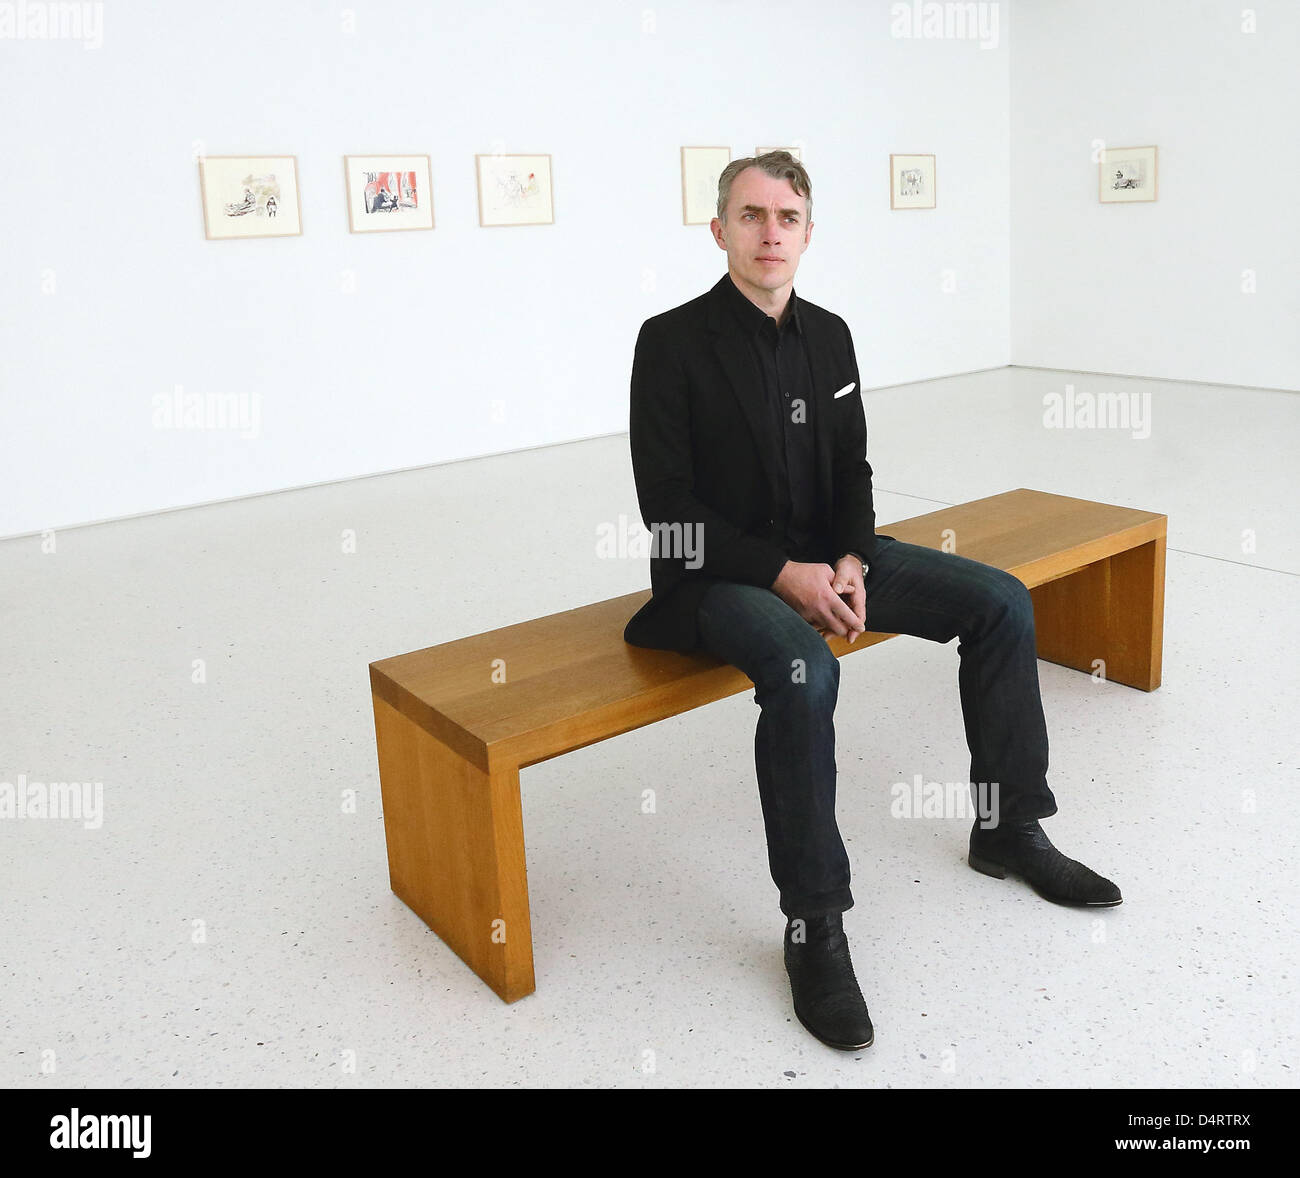 Neo Rauch sits in the exhibition 'Neo Rauch - The Graphic Work - Part 2' in the Grafikstiftung in Aschersleben, Germany, 15 March 2013. The exhibition opens on 17 March 2013. Rauch spent his childhood and youth in the city. Photo: Jens Wolf Stock Photo